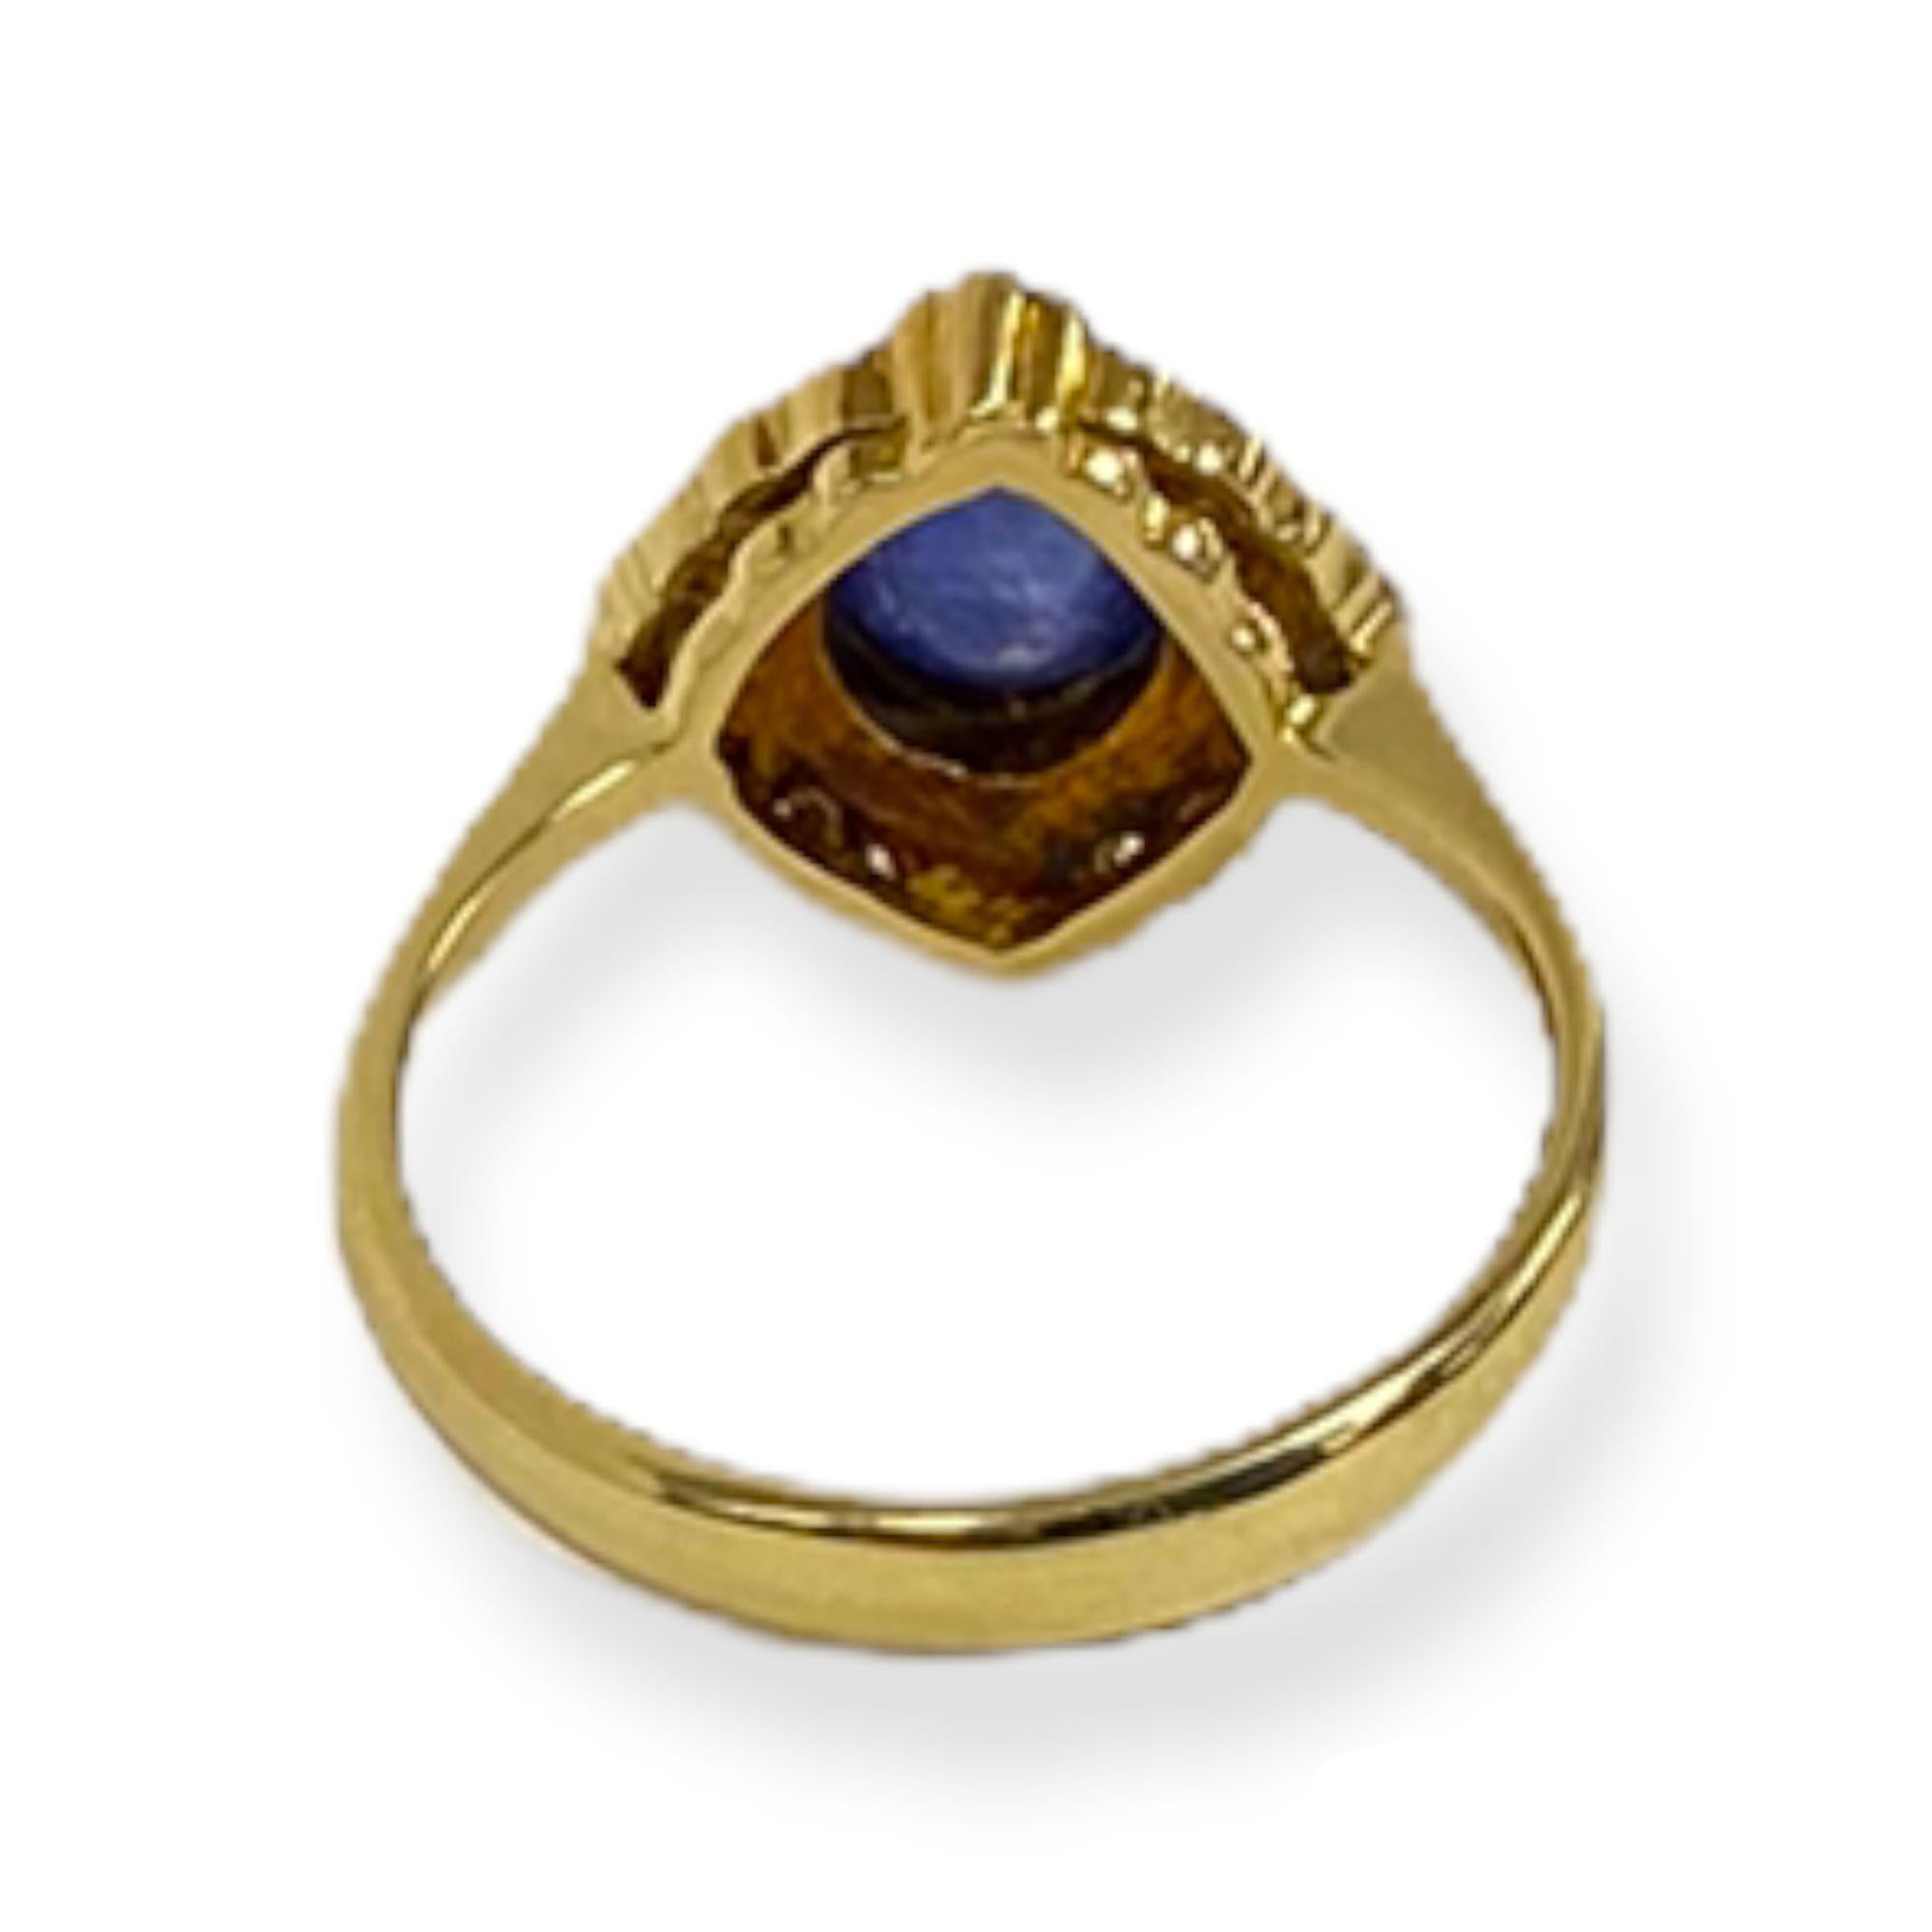 This spectacular ring from the Suzy Levian collection features 14k yellow gold. An array of white diamonds (.25cttw) accent the perfect blue color of the sapphire gemstone center stone (1.00ct) The brilliance of these gems and the luster of the